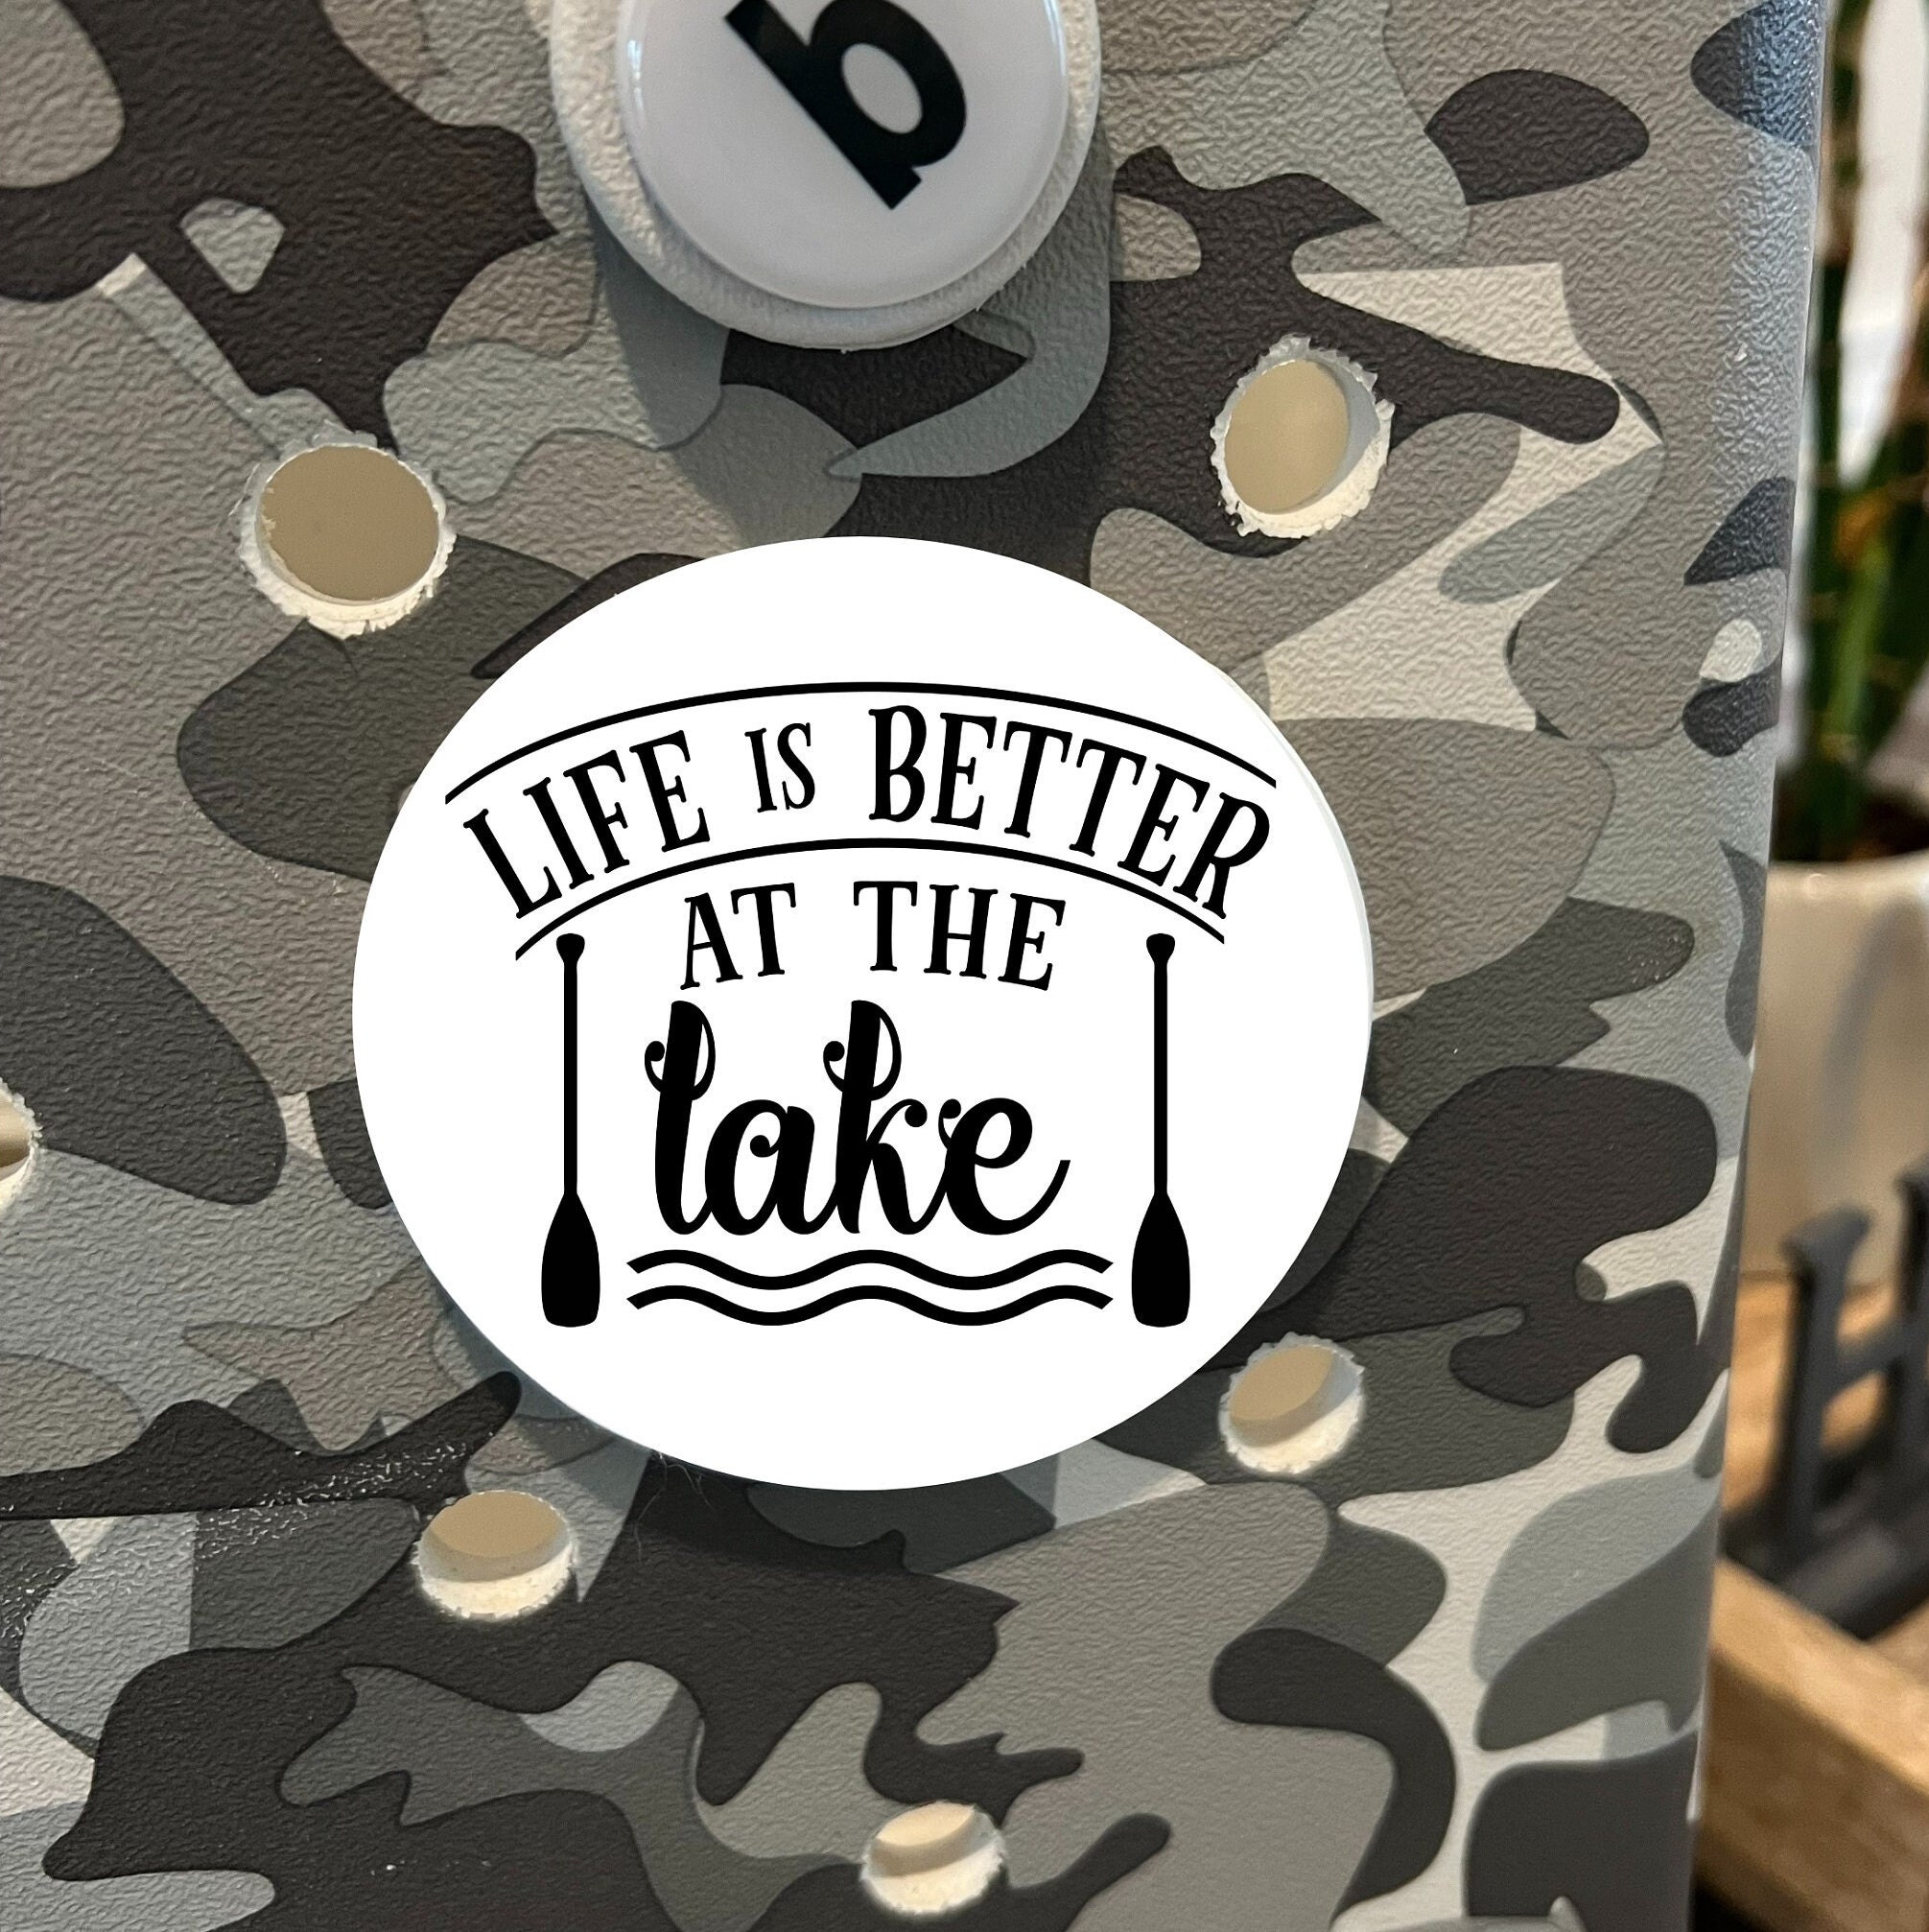 Pontoon Boat , Father's Day Gift, Pontoon Boats, Pontoon Boat Gifts, Gift  for Husband, Lake Life, Gift for Men, Gift for Women, Coffee Mug 